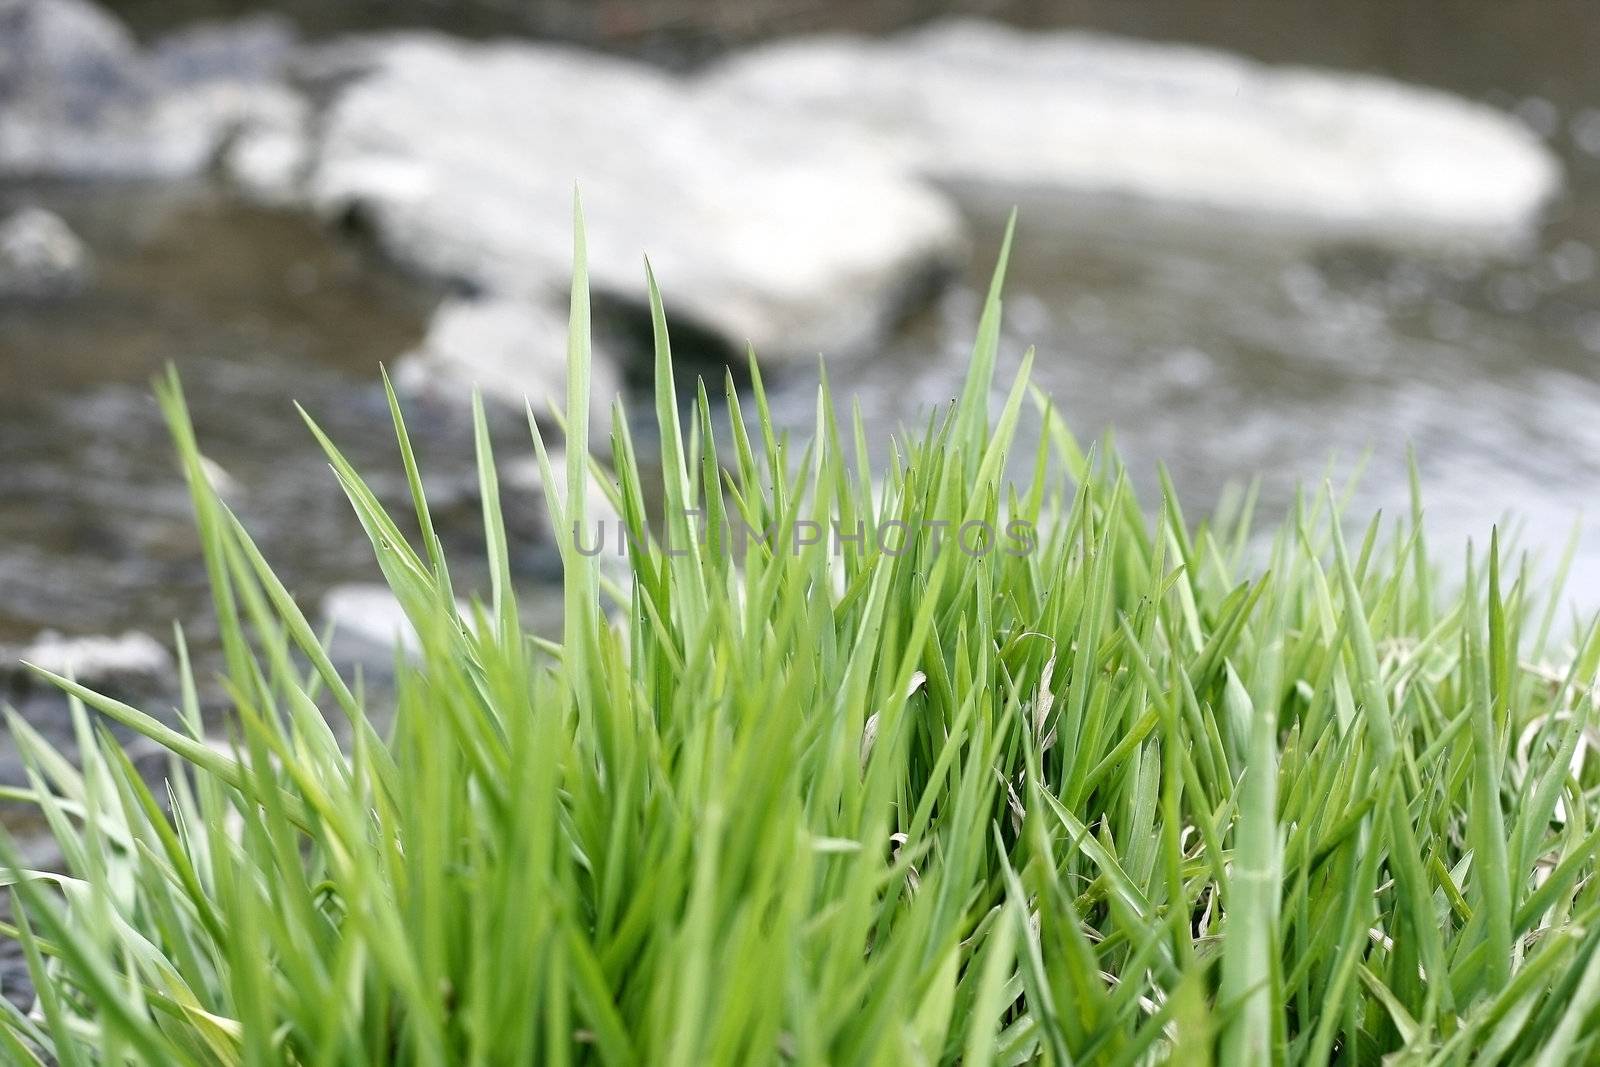 Grass growing in the water by a river bank